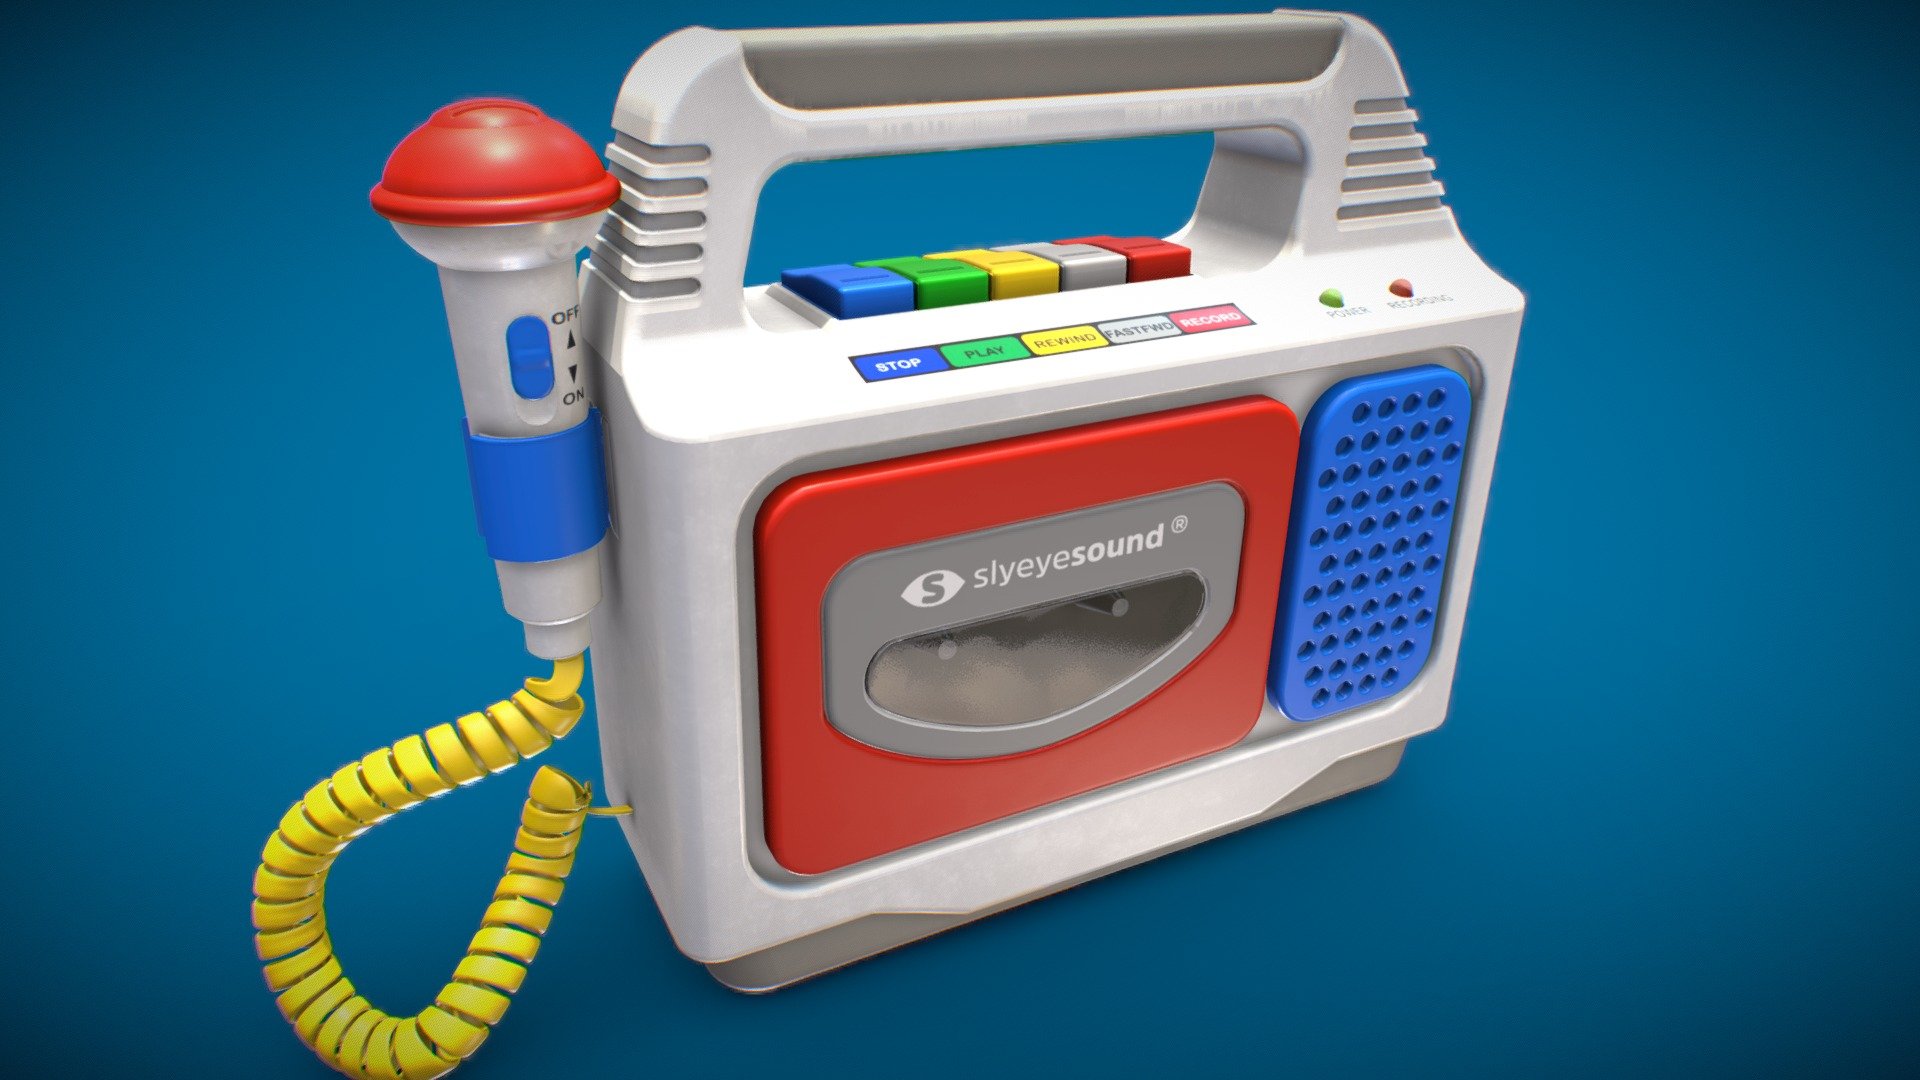 Modeled in Rhino, UVed in Maya, textured in Substance Painter.

Based on reference images from a vintage 1990s German released &lsquo;SoundMaster Sing-A-Song Kinder Kassetten Rekorder'. Apparently a couple other companies (DSI, Street Beat) also released this model as their &lsquo;Sing-along Cassette Recorder'. All made in China 

(original text altered for model) - Kinder Sound Recorder - Buy Royalty Free 3D model by SlyEye (@TomAce) 3d model